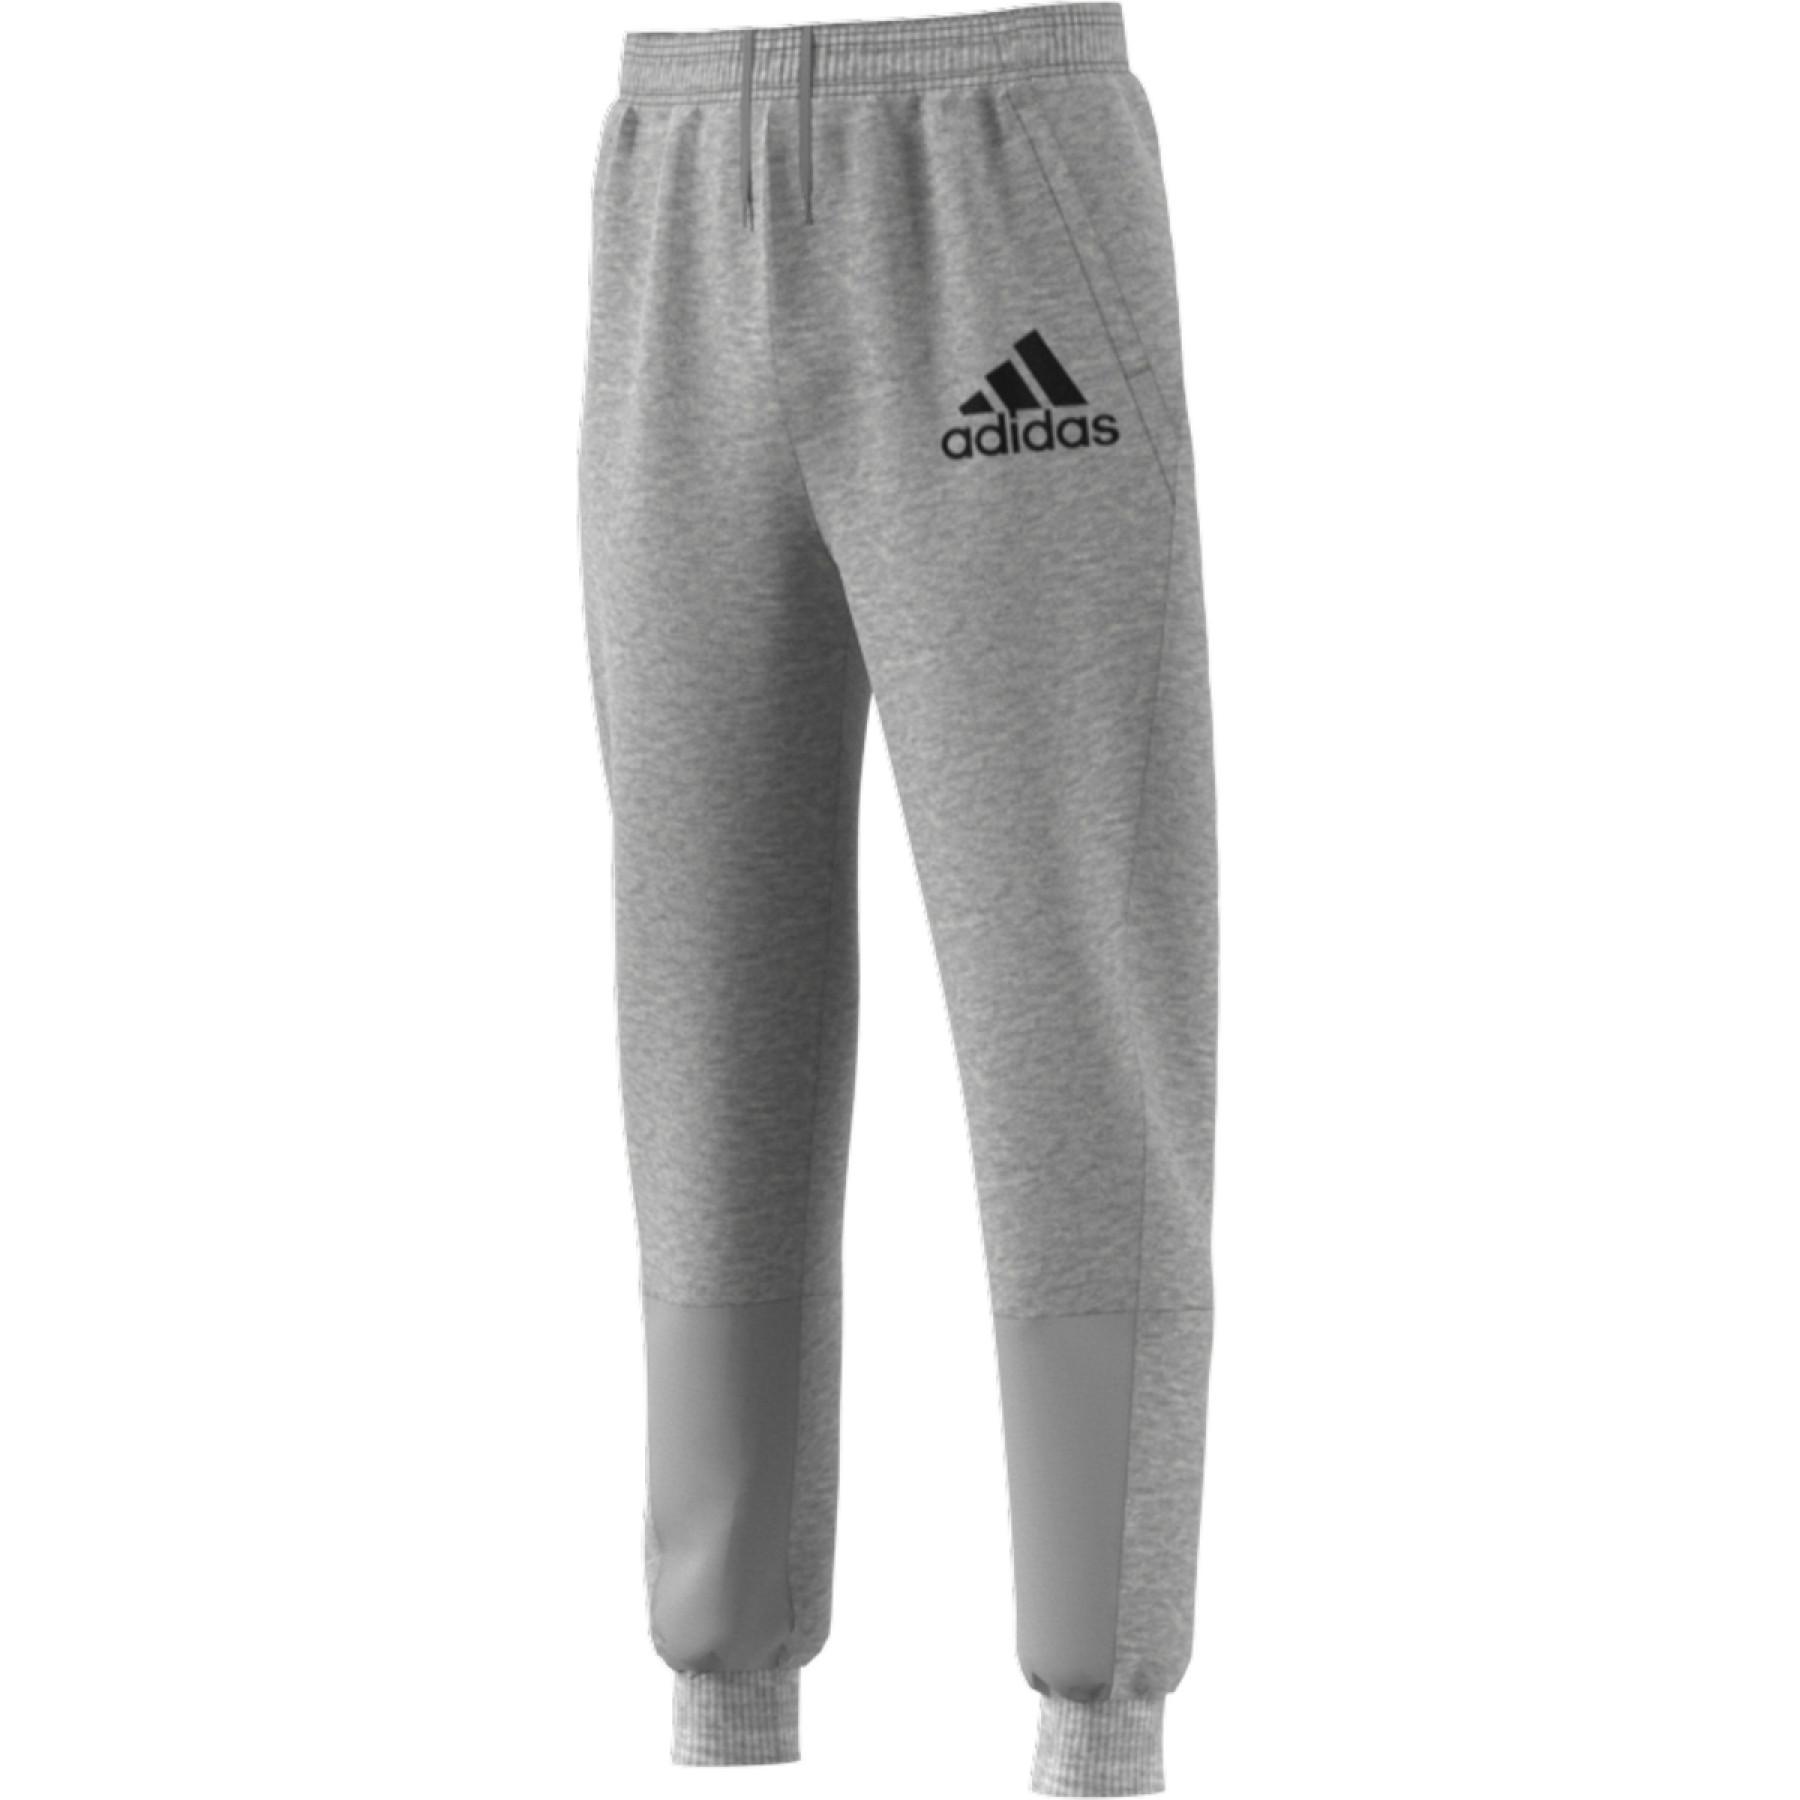 Children's trousers adidas Badge of Sport